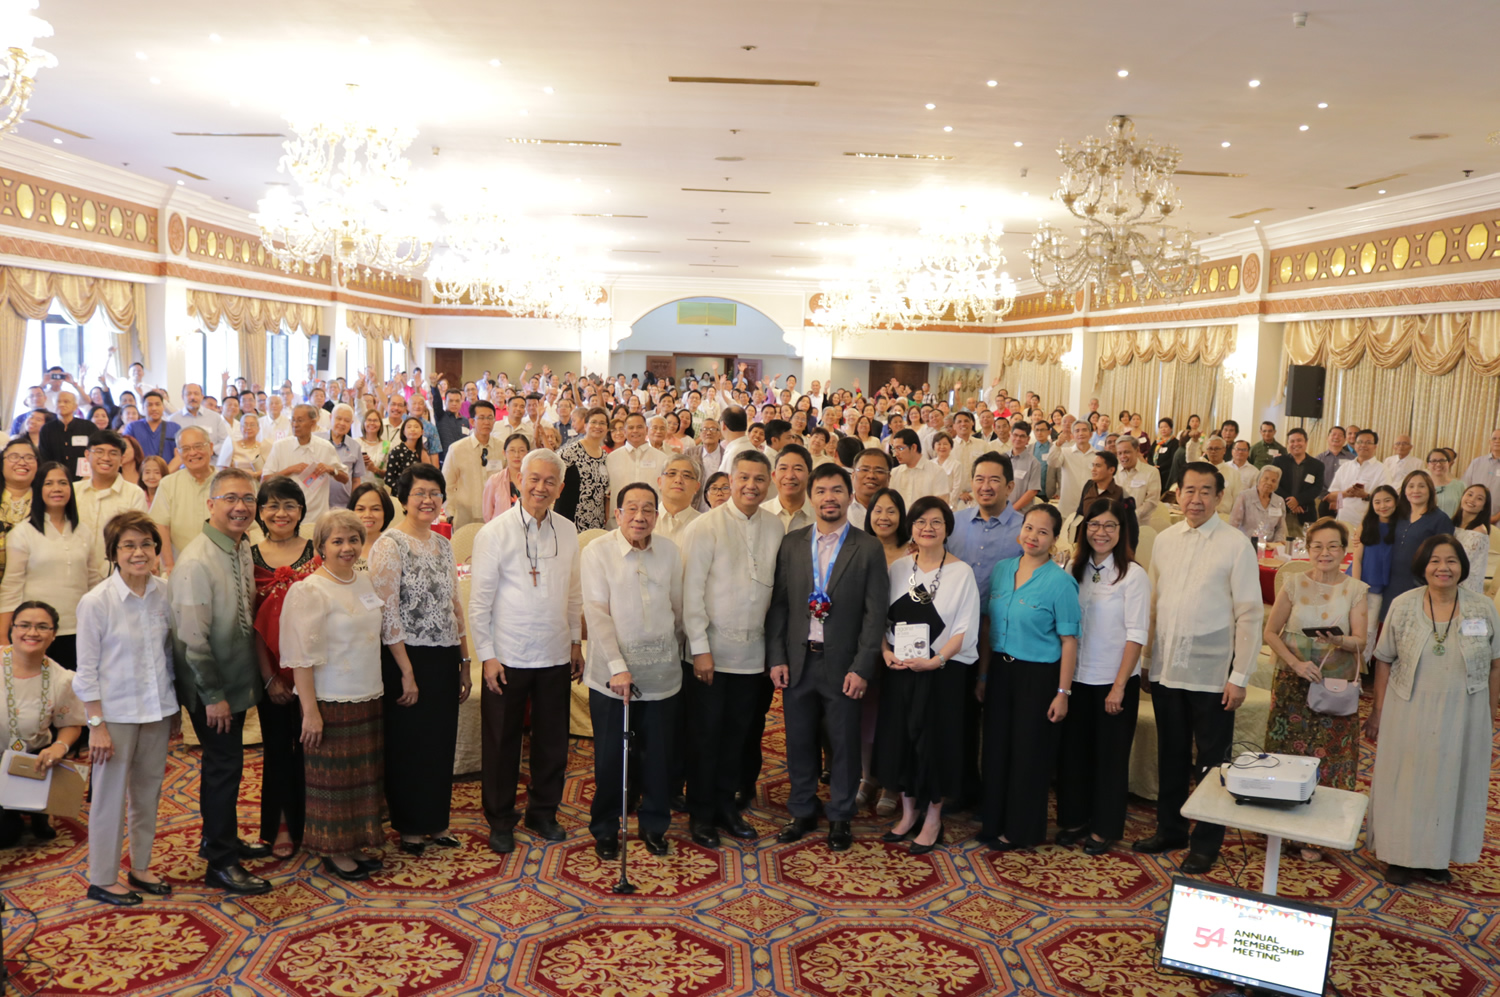 54 Blessings from the Philippine Bible Society’s 54th Annual Membership Meeting